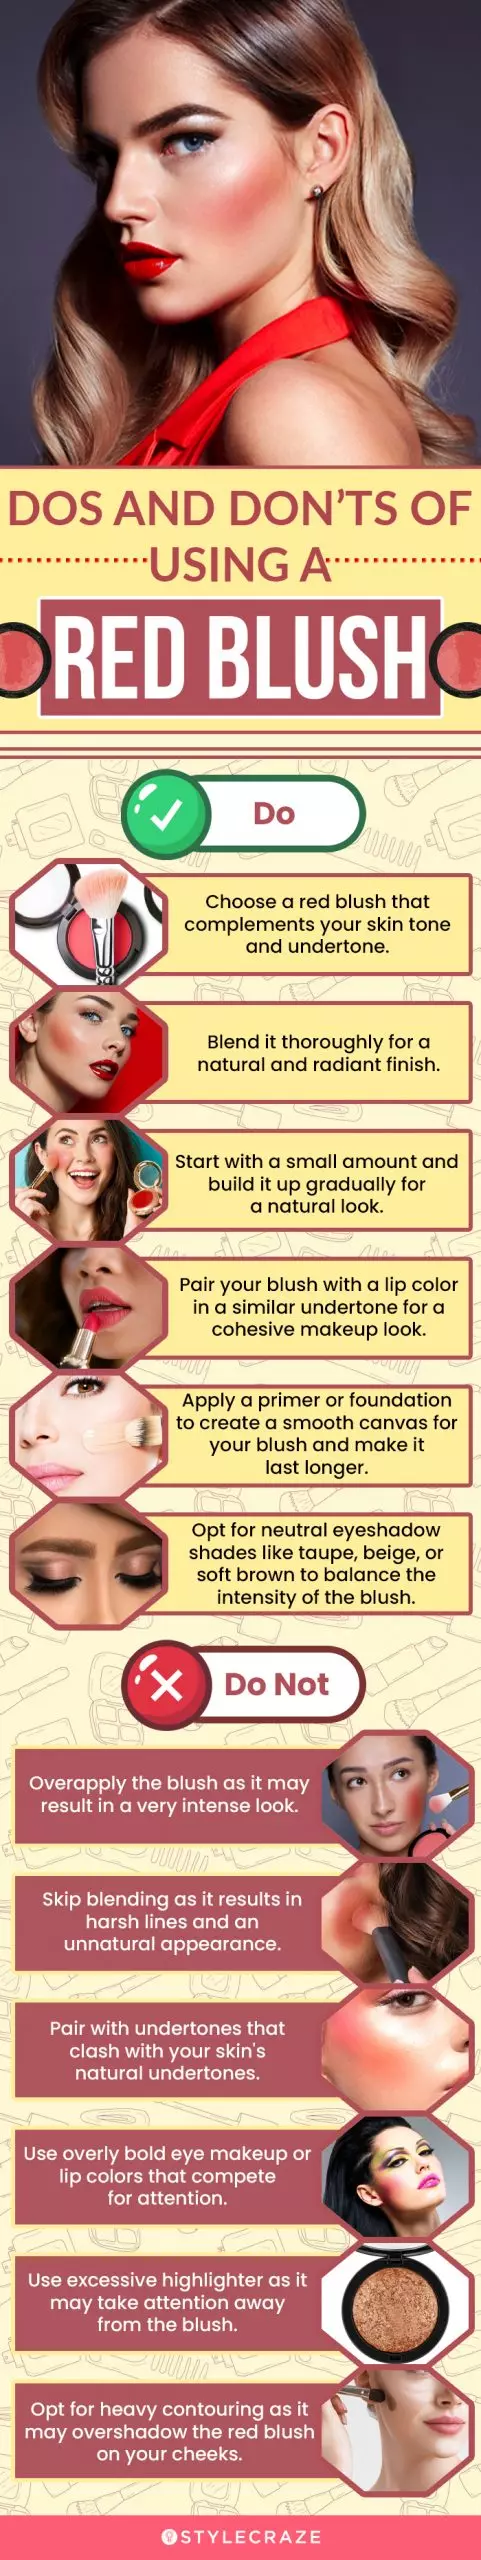 Dos And Don’ts Of Using A Red Blush (infographic)